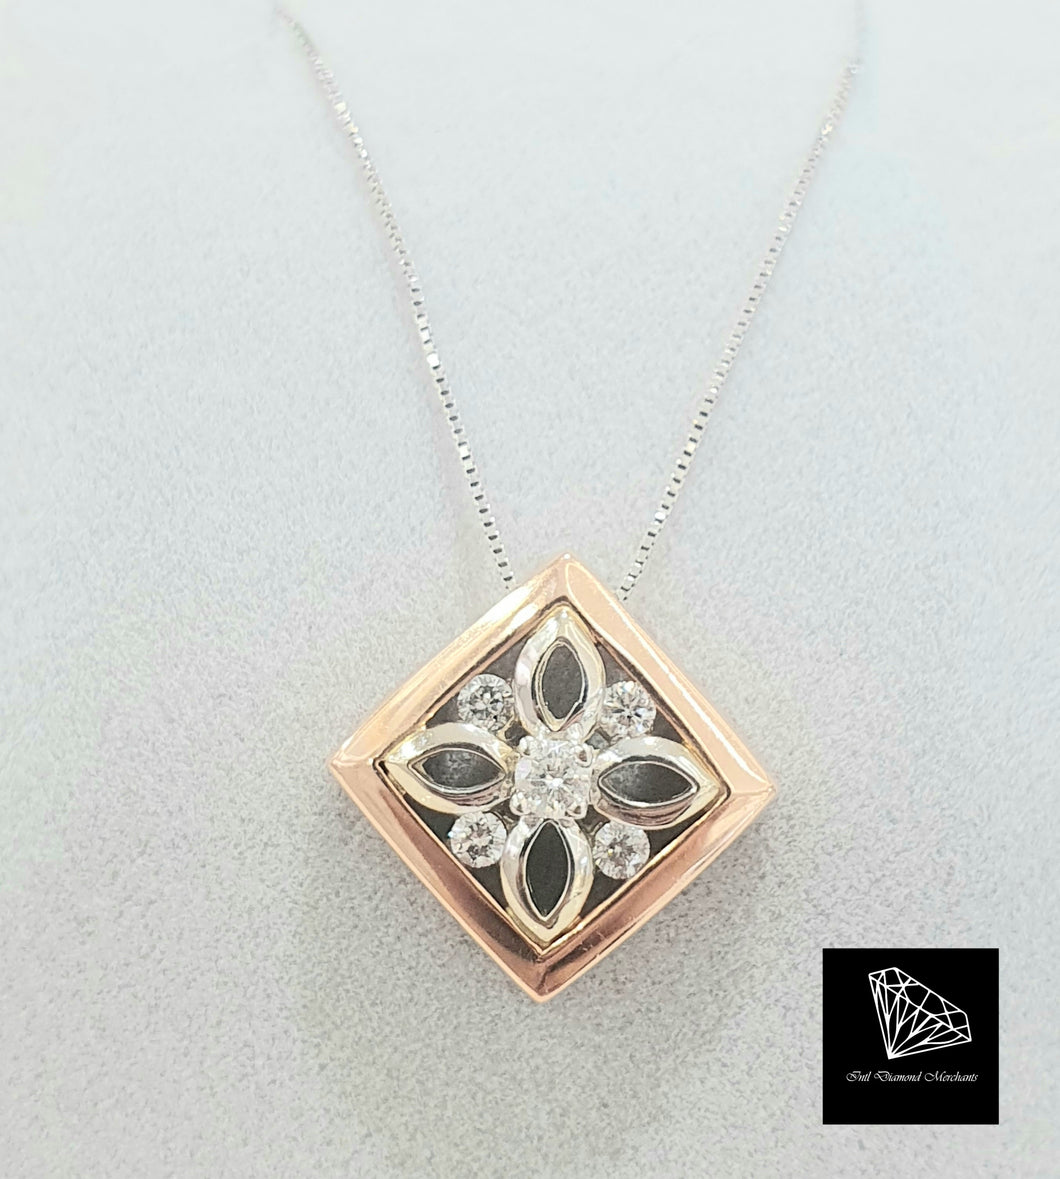 0.24cts [5] Round Brilliant Cut Diamonds | Designer Pendant and Chain | 10kt Rose and White Gold